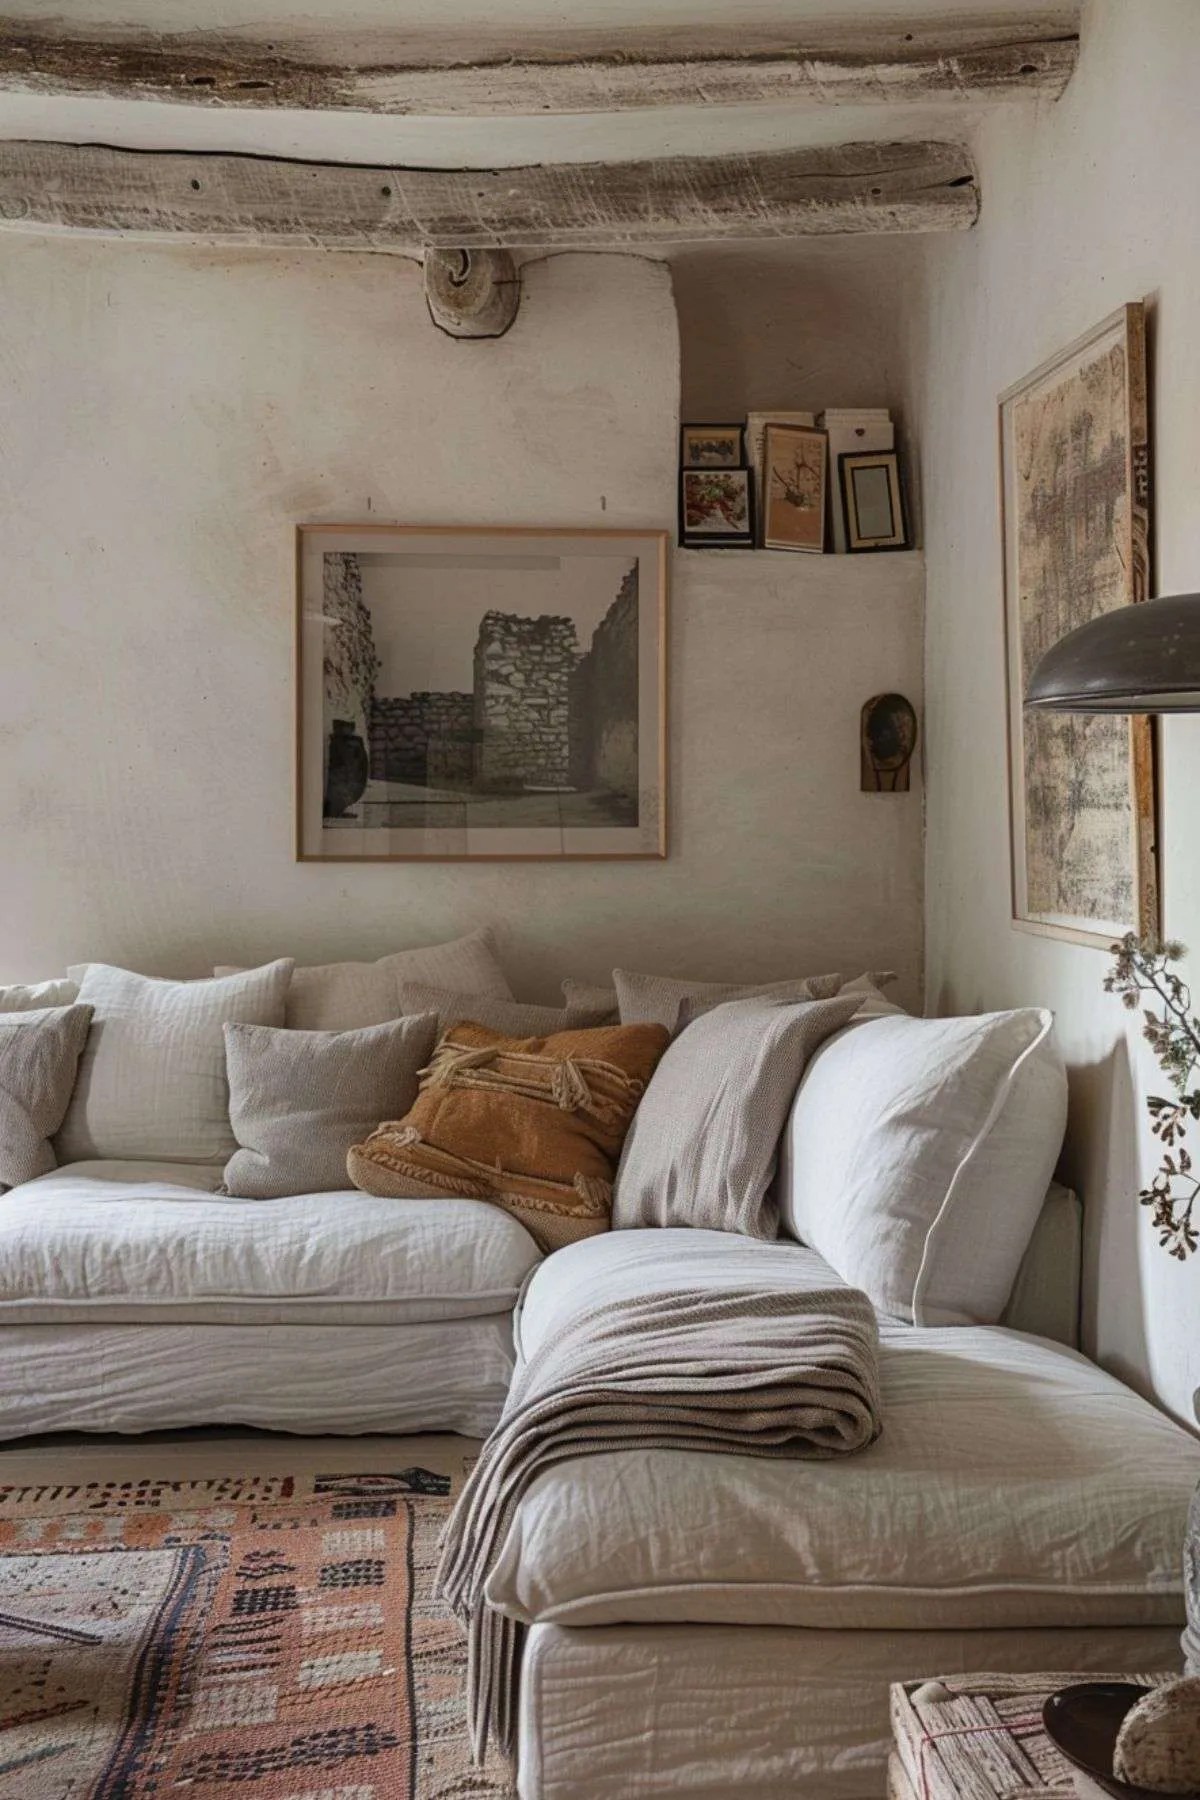 Creating a Cozy Home: 8 Ways to Make Your Home Warm and Inviting